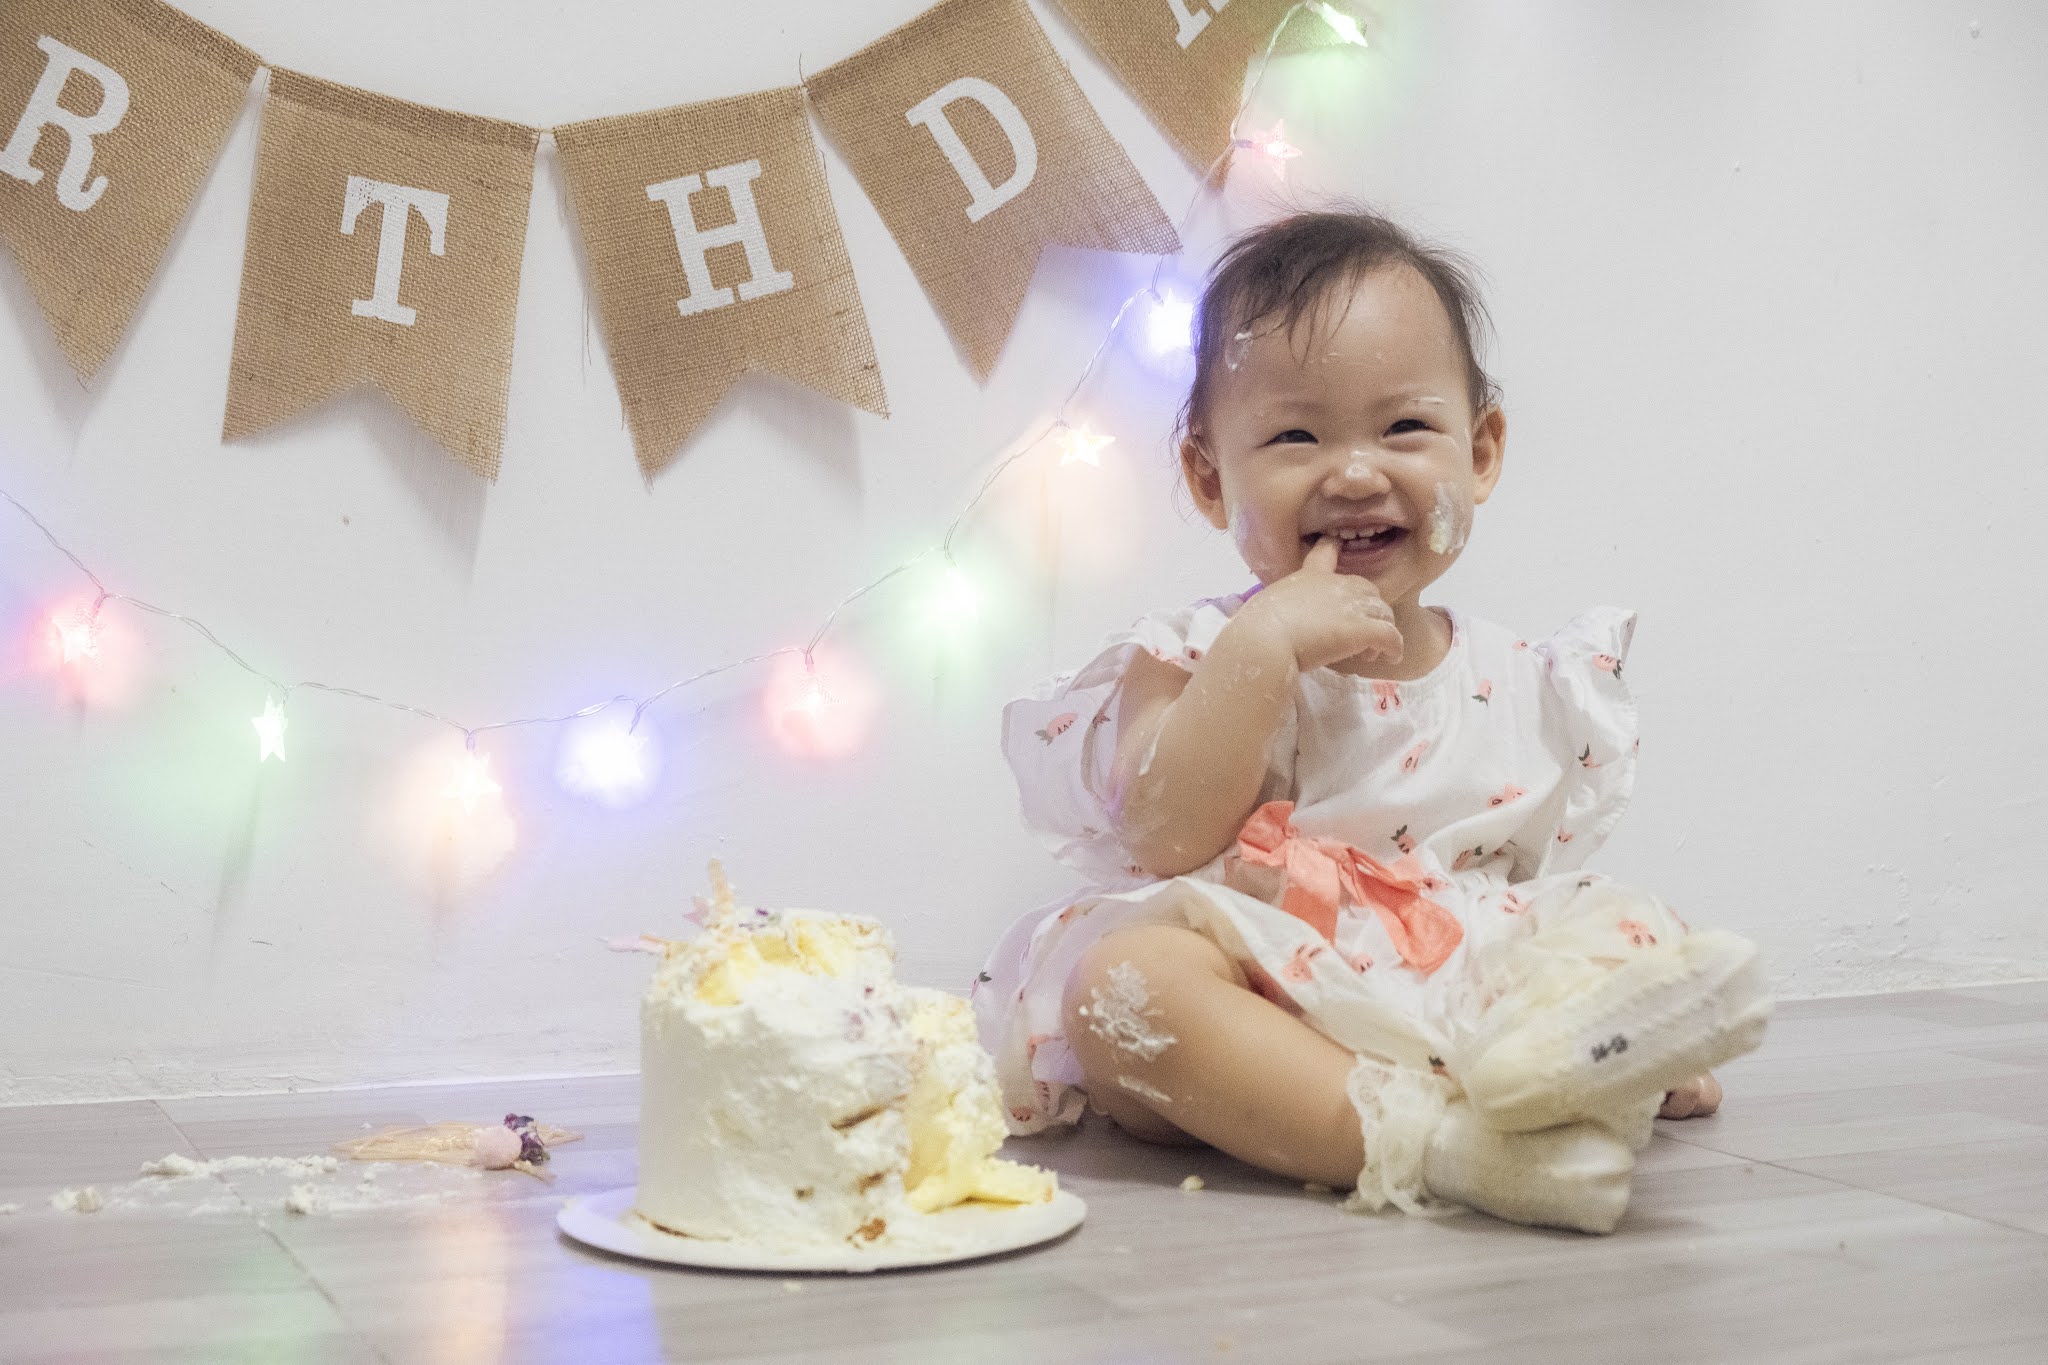 Celebrating Our Baby First Birthday - Tips For Baby Birthday at Home in Lockdown